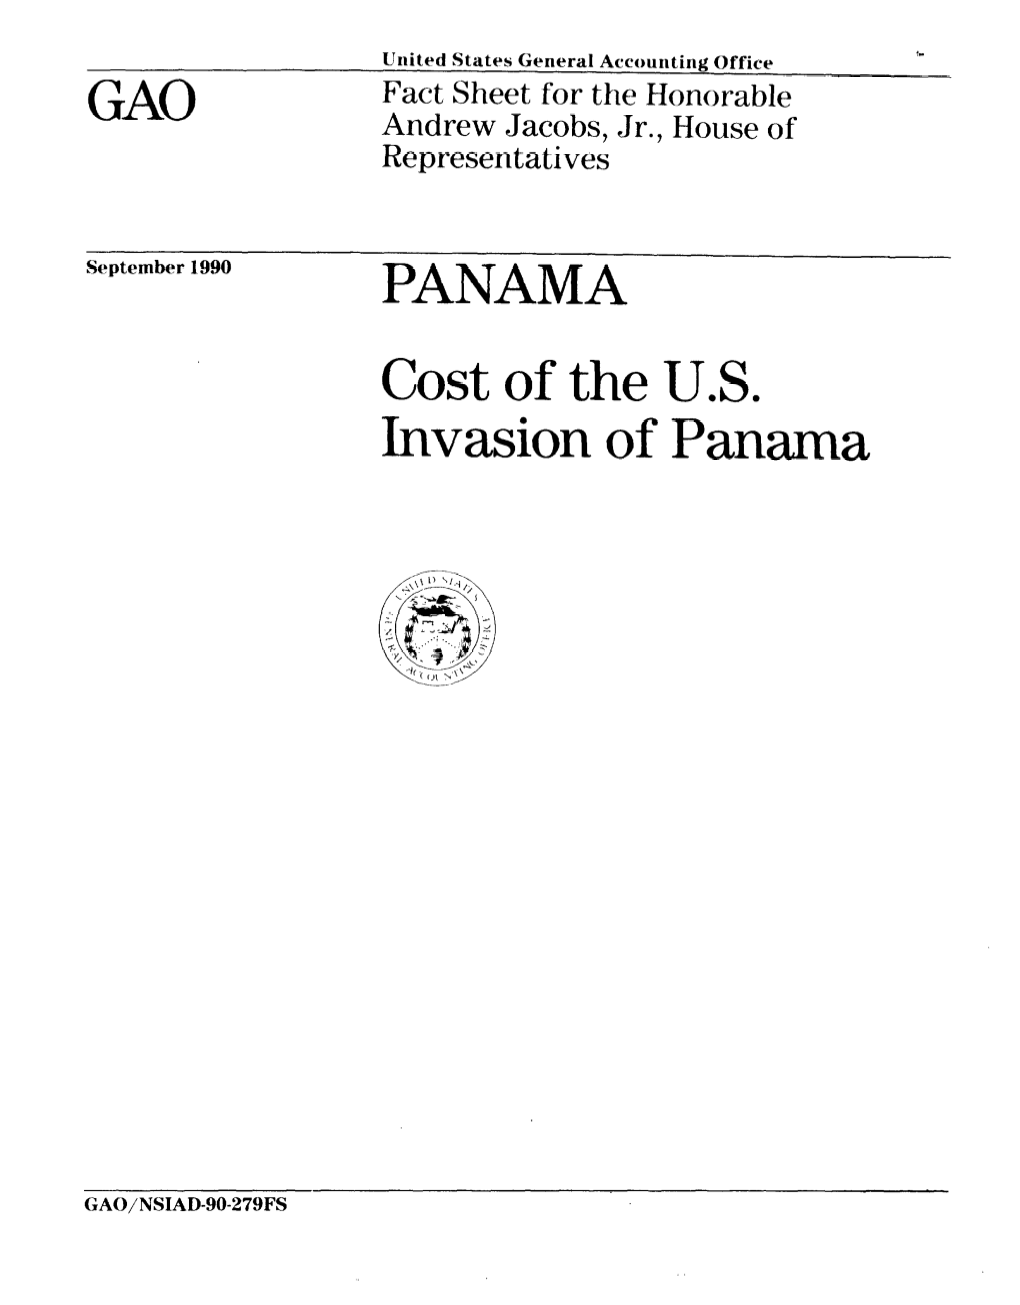 Cost of the US Invasion of Panama